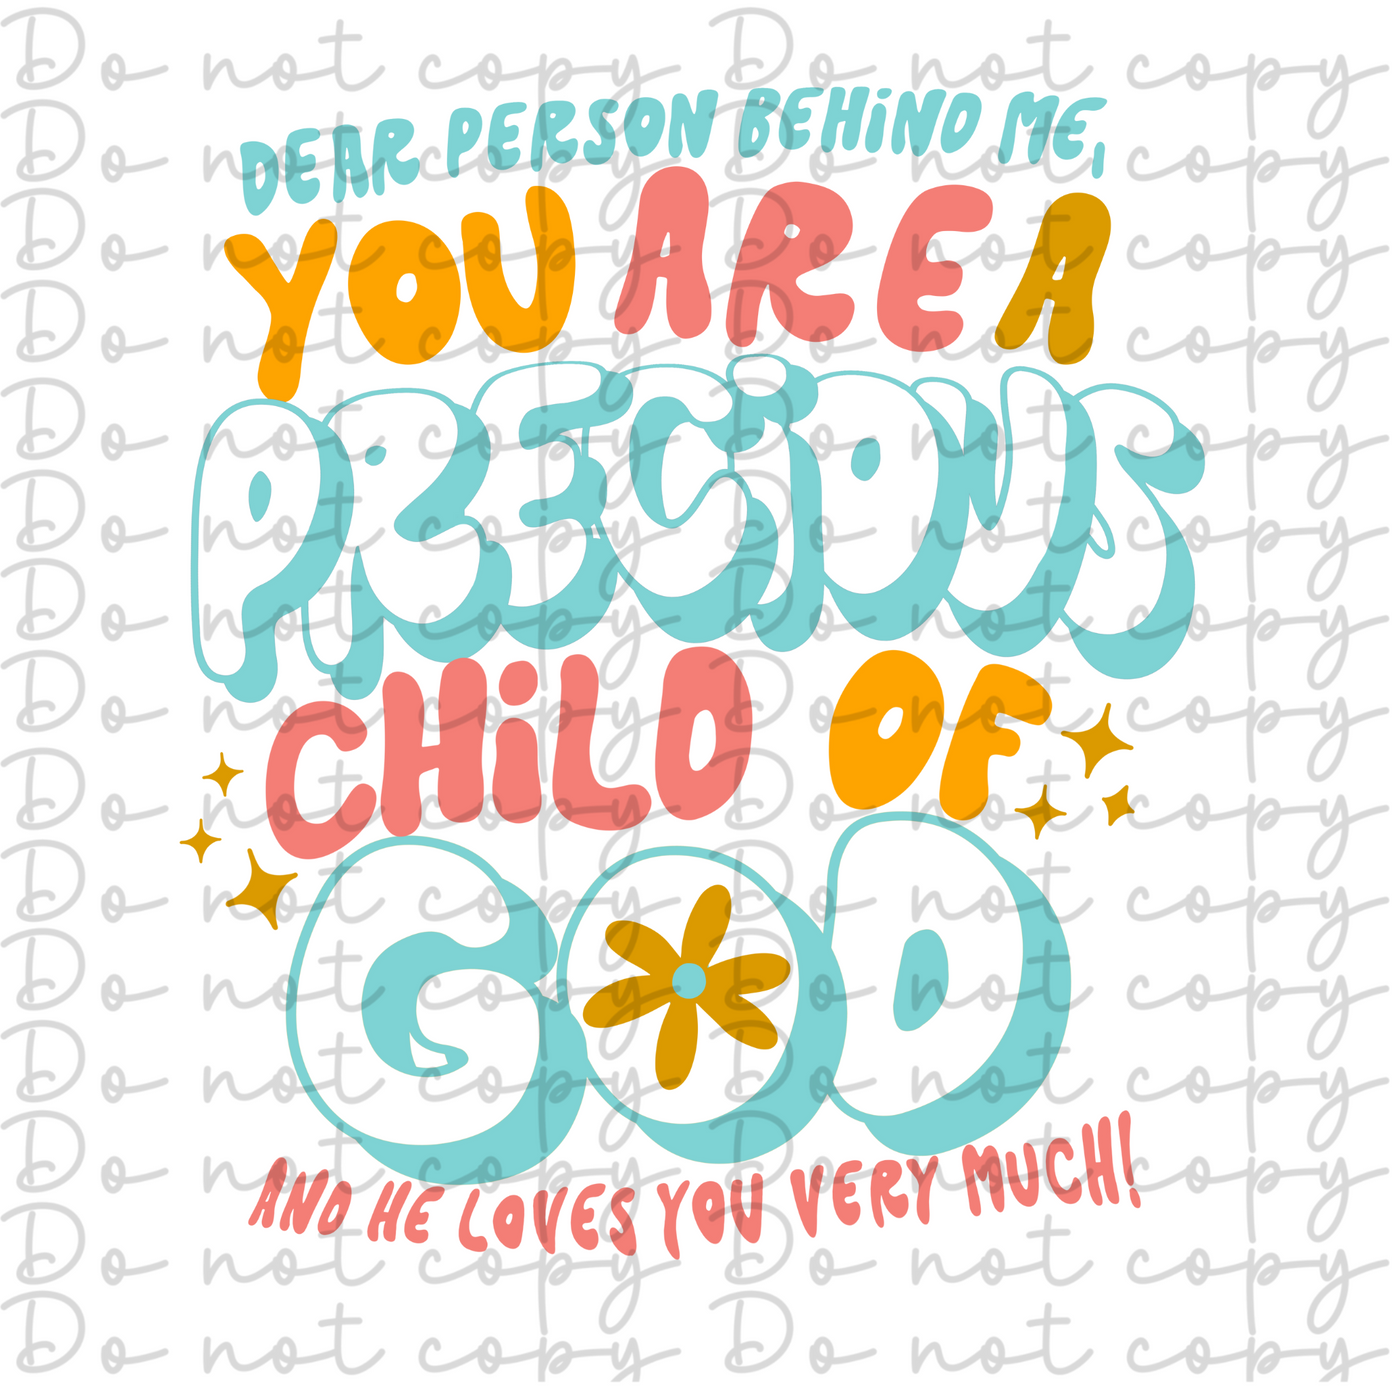 DTF Transfer - Dear person behind me, you are a precious child of God